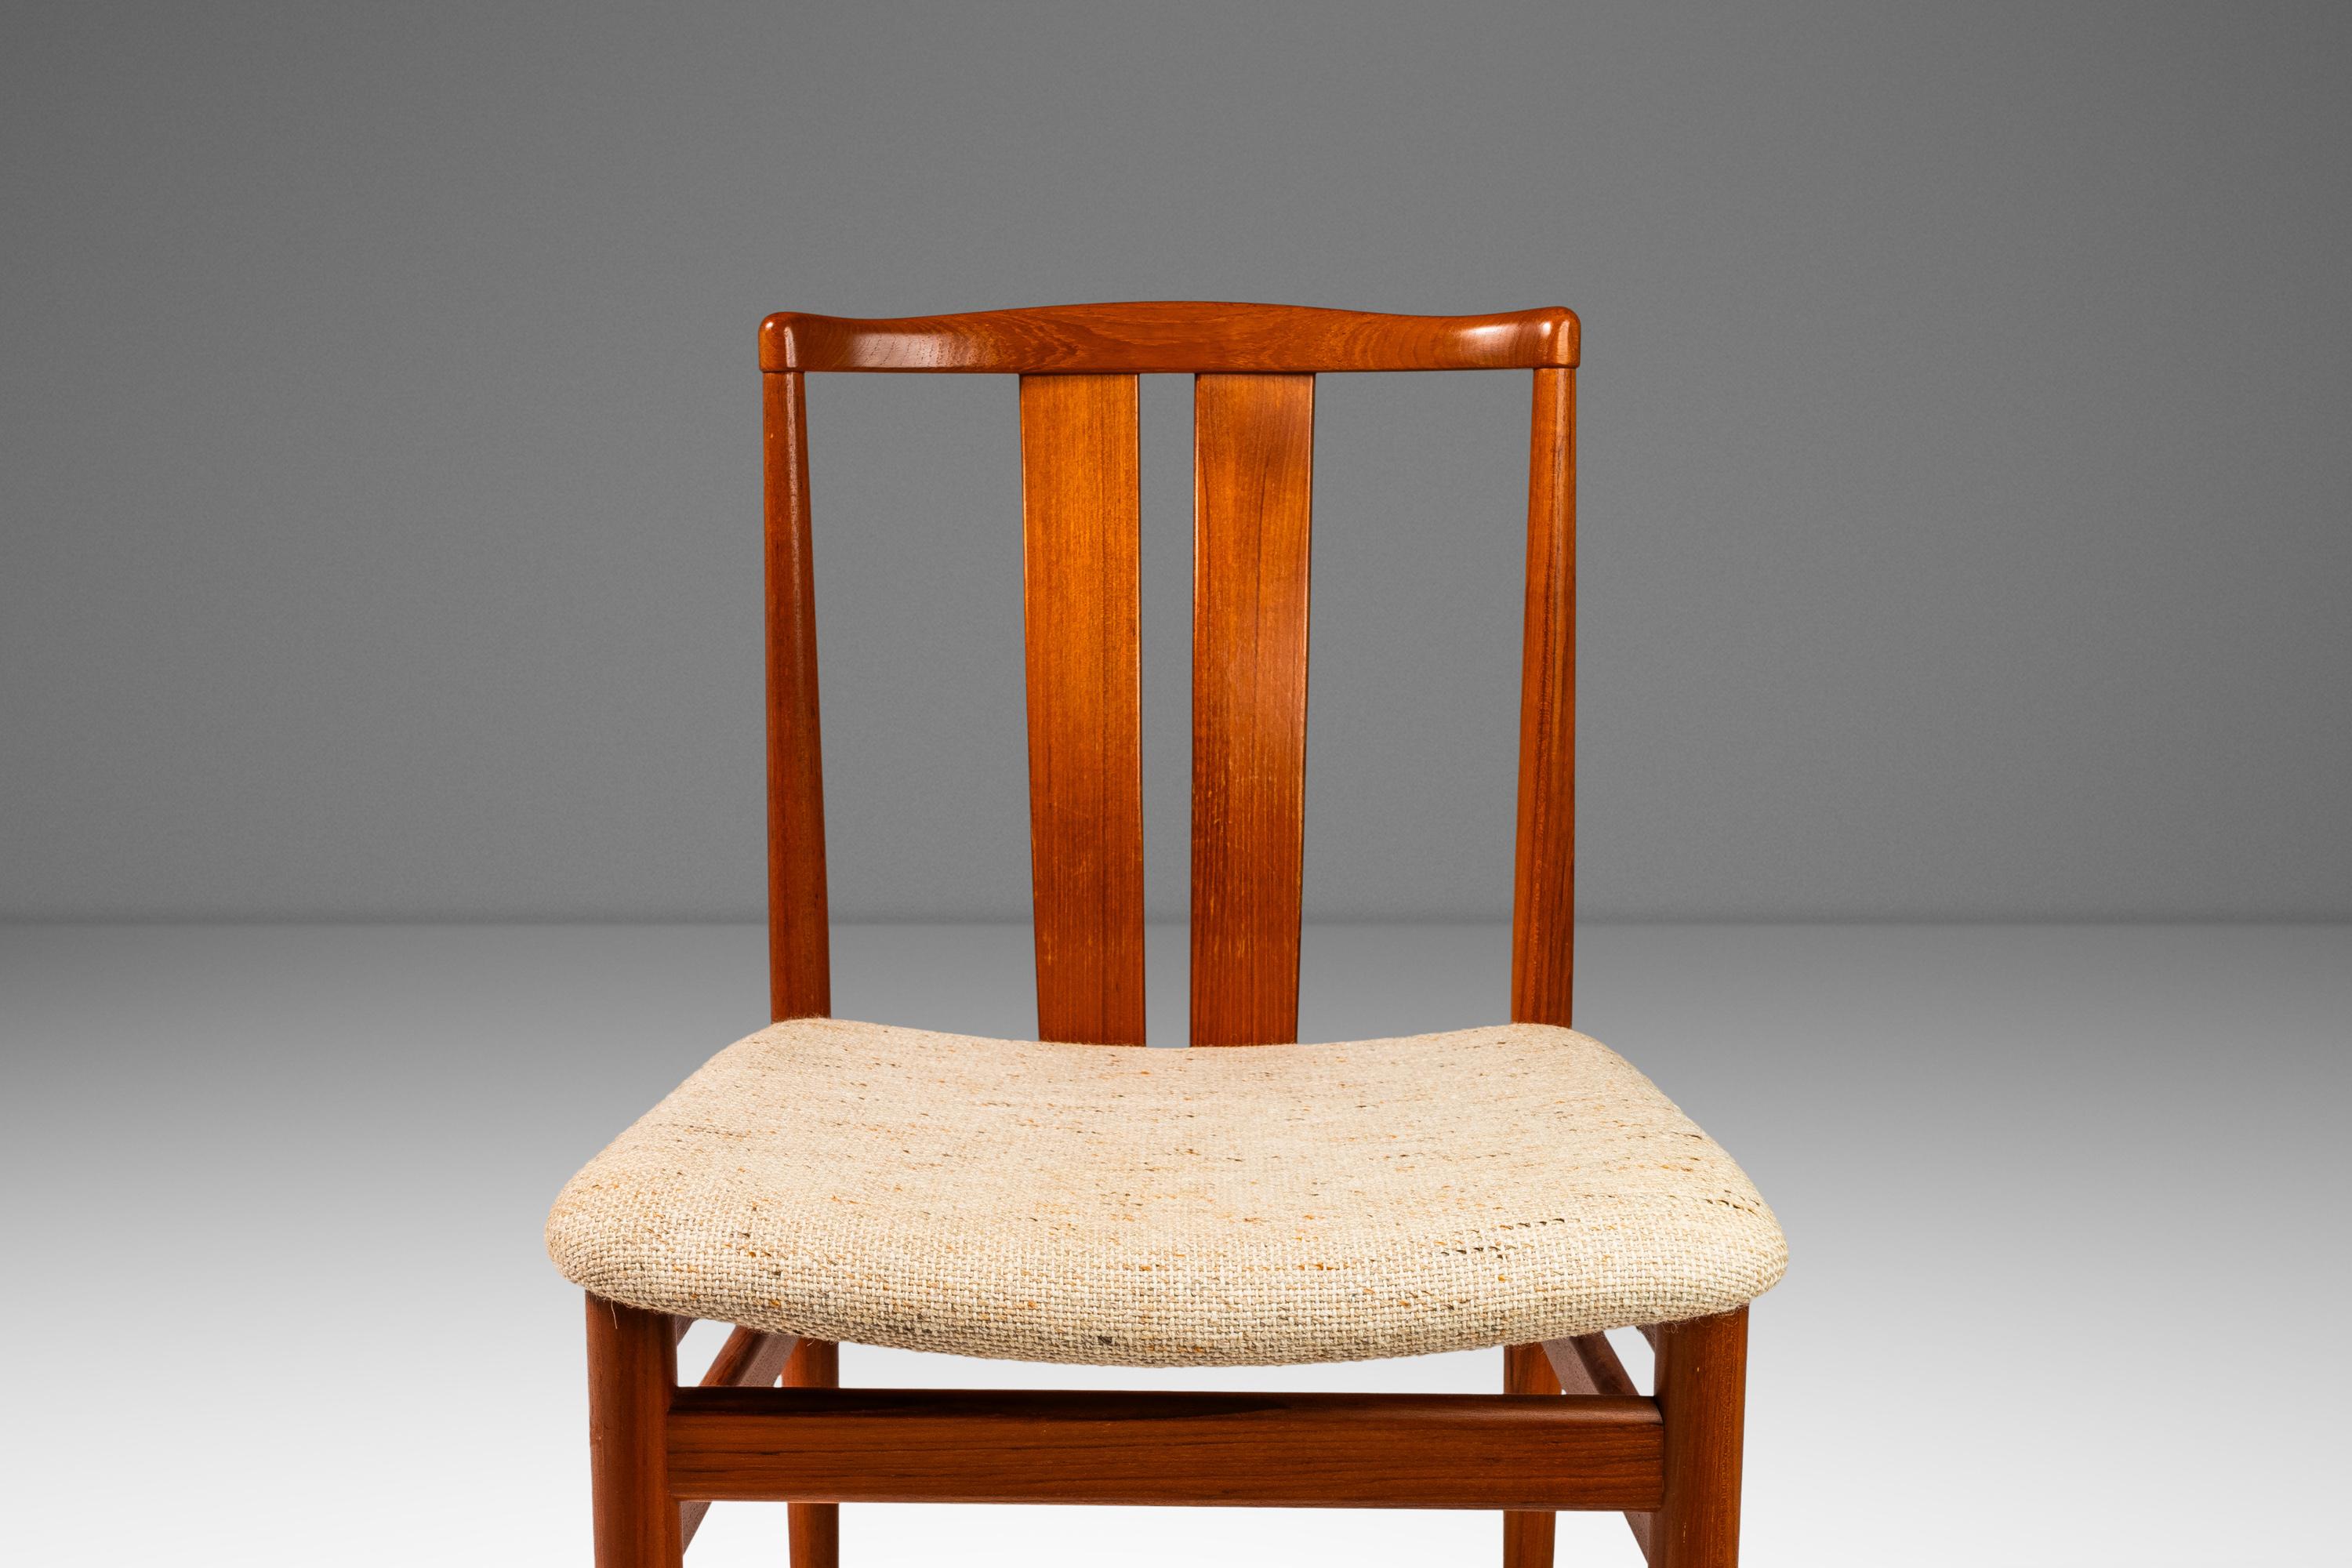 Set of 4 Dining Chairs, Teak & Oatmeal Knit Fabric by Vamdrup Stolefabrik, 1960s For Sale 4